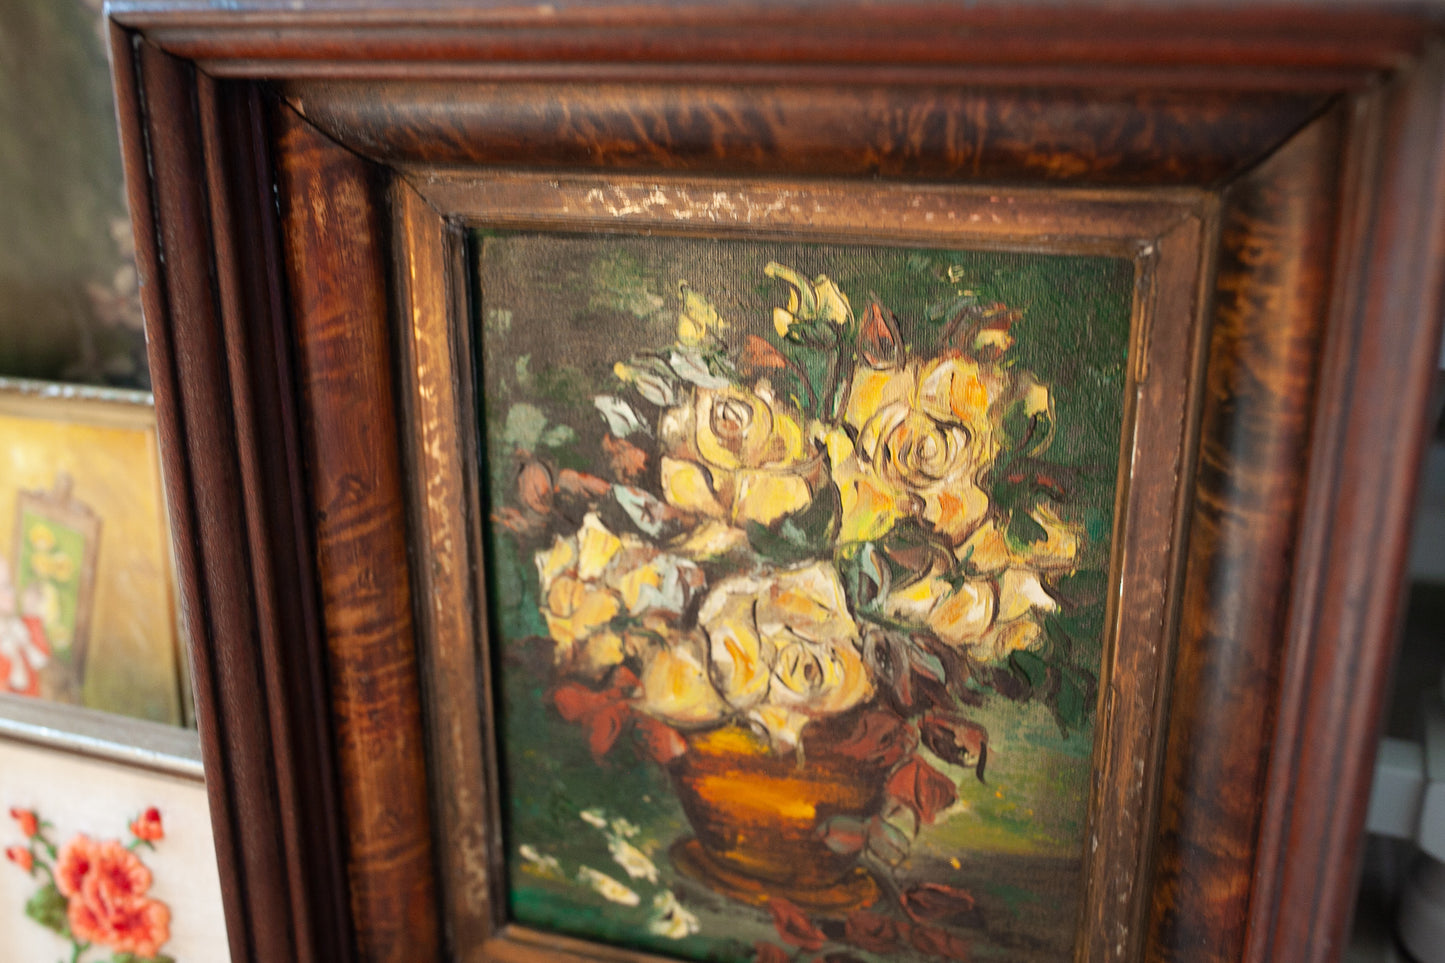 Vintage Framed Floral - Antique Wood Frame Painted Floral Painting - Yellow Flowers